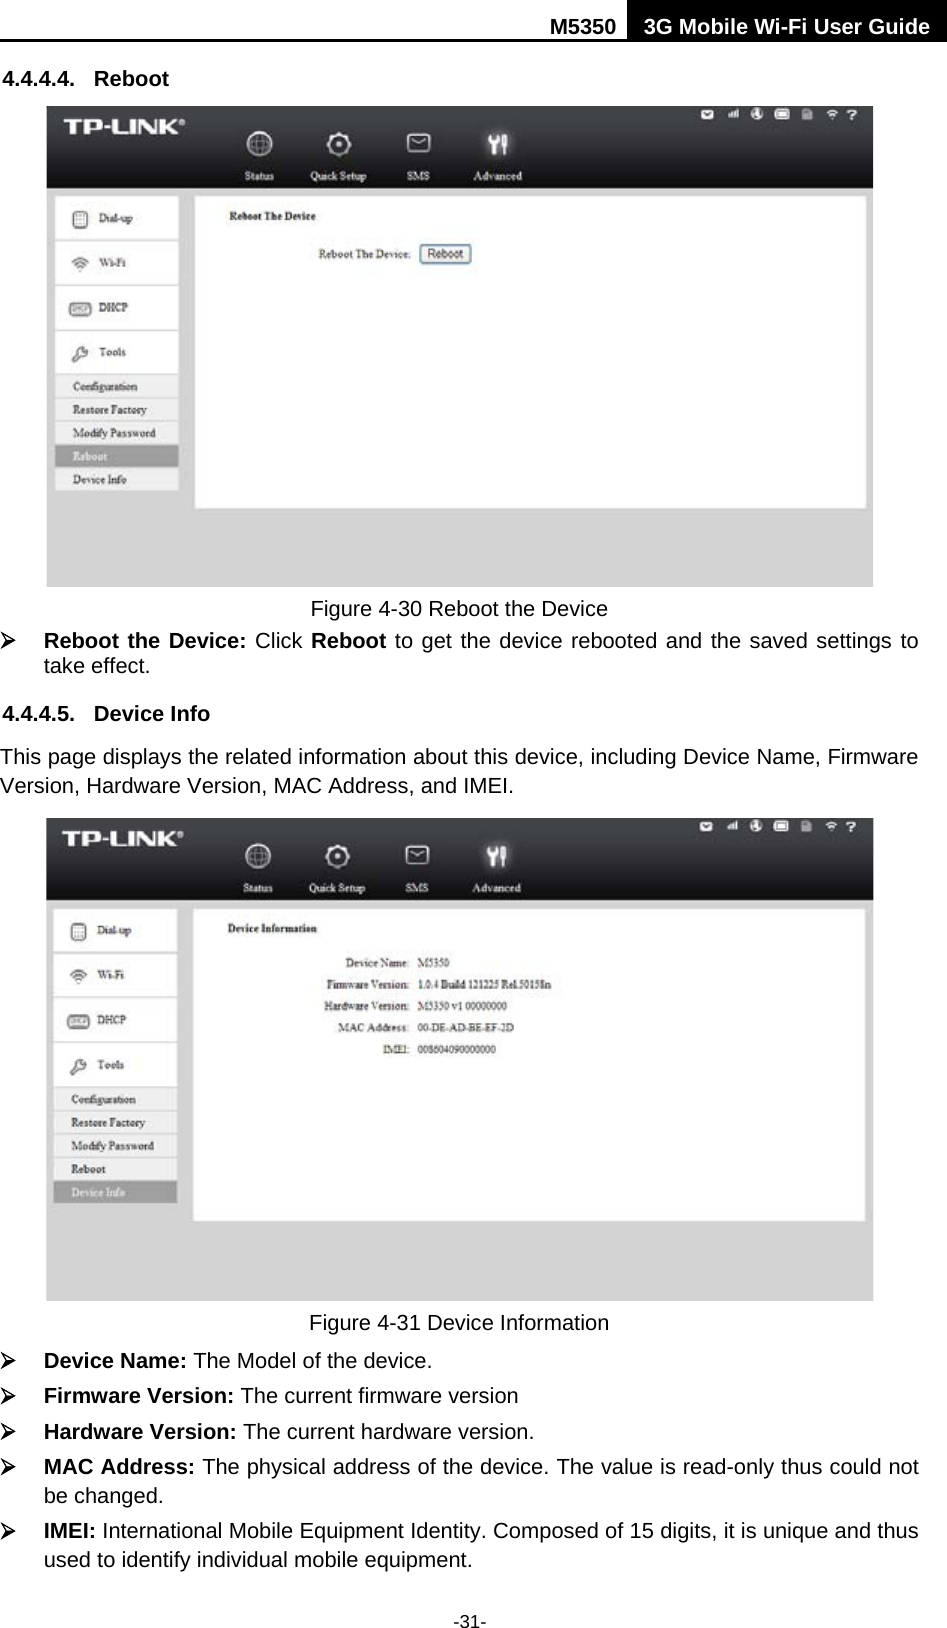 M5350 3G Mobile Wi-Fi User Guide  -31- 4.4.4.4. Reboot  Figure 4-30 Reboot the Device  Reboot the Device: Click Reboot to get the device rebooted and the saved settings to take effect. 4.4.4.5. Device Info This page displays the related information about this device, including Device Name, Firmware Version, Hardware Version, MAC Address, and IMEI.  Figure 4-31 Device Information  Device Name: The Model of the device.  Firmware Version: The current firmware version  Hardware Version: The current hardware version.  MAC Address: The physical address of the device. The value is read-only thus could not be changed.  IMEI: International Mobile Equipment Identity. Composed of 15 digits, it is unique and thus used to identify individual mobile equipment. 